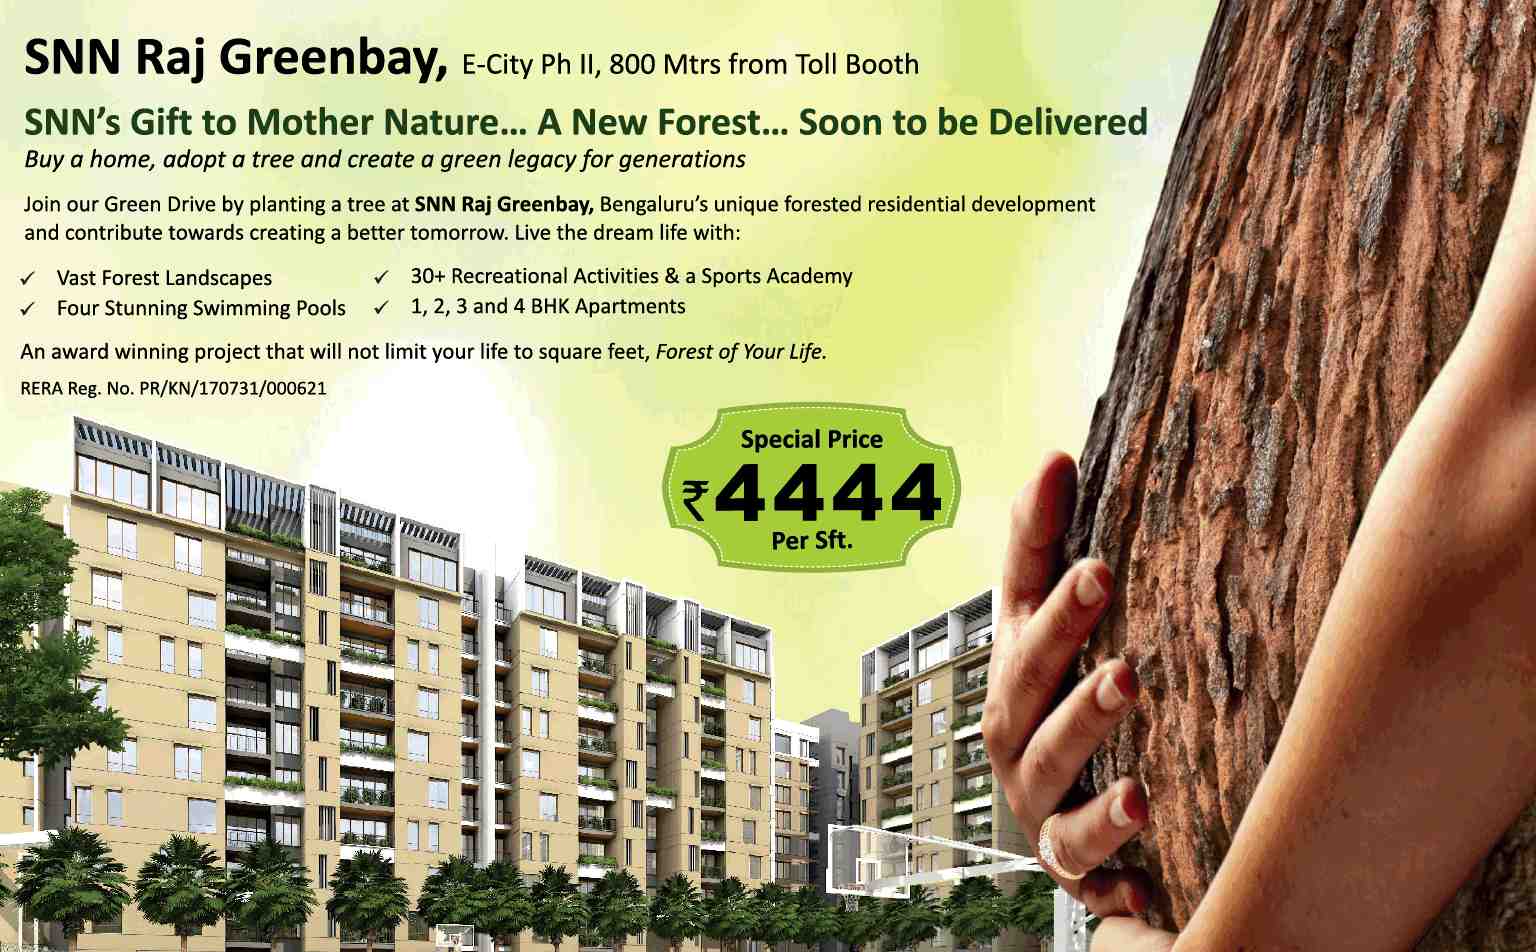 Buy a home, adopt a tree and create a green legacy for generations at SNN Raj Greenbay in Bangalore Update